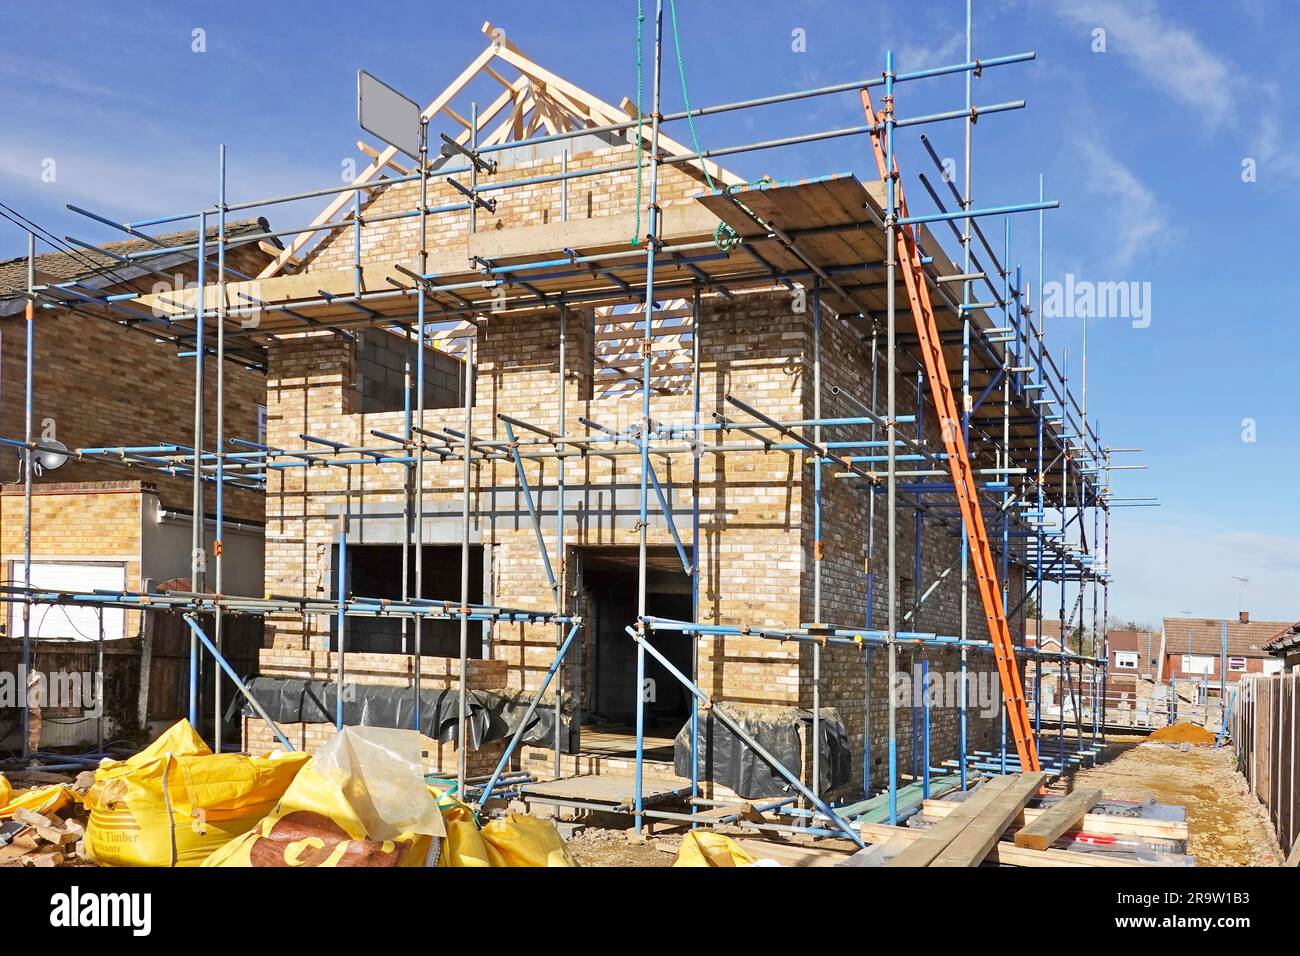 New build detached residential property with superstructure brick walls progressing at gable end with timber roof trusses fixed in position England UK Stock Photo